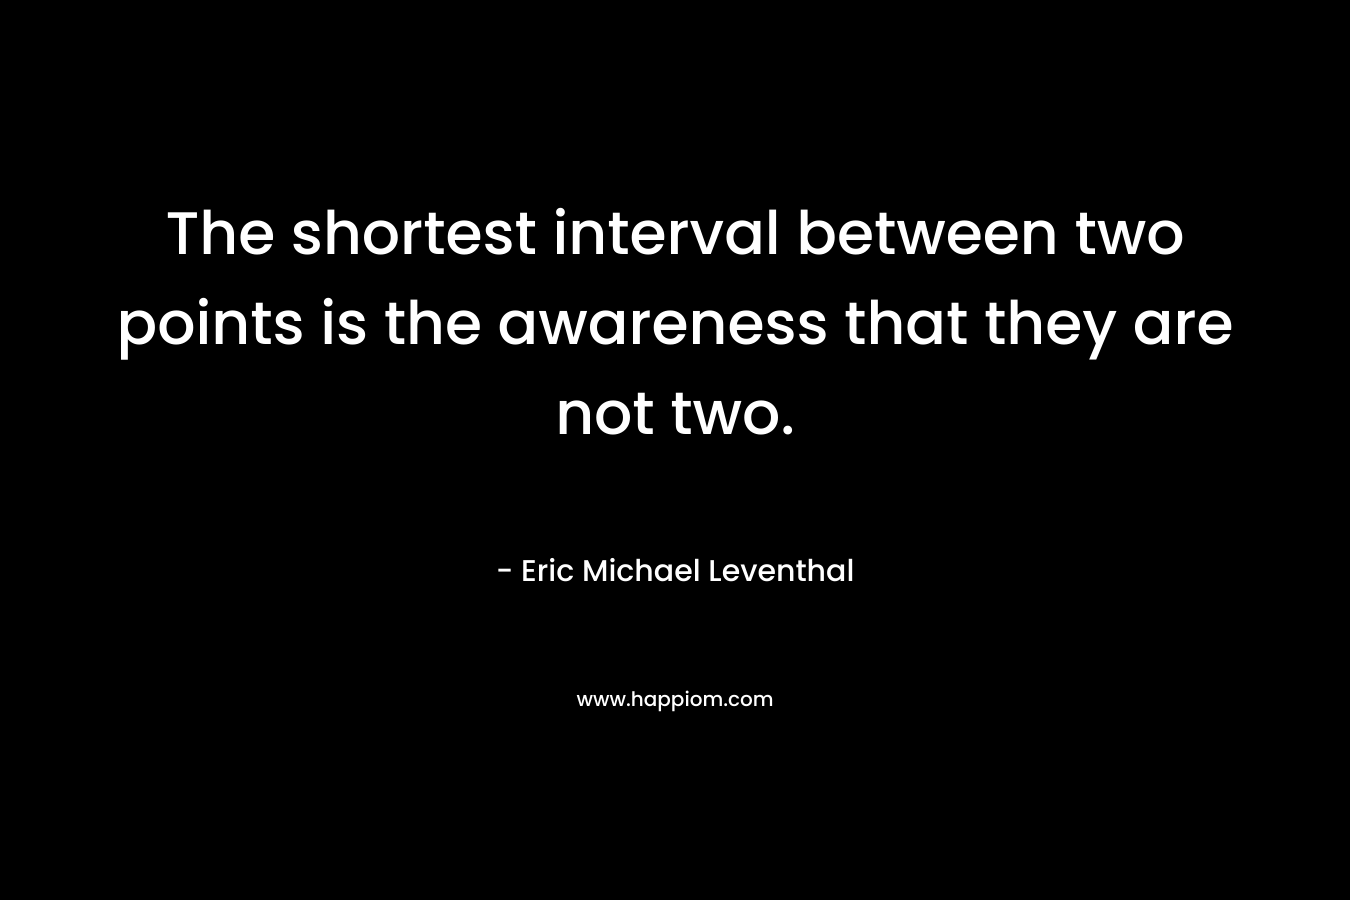 The shortest interval between two points is the awareness that they are not two. – Eric Michael Leventhal